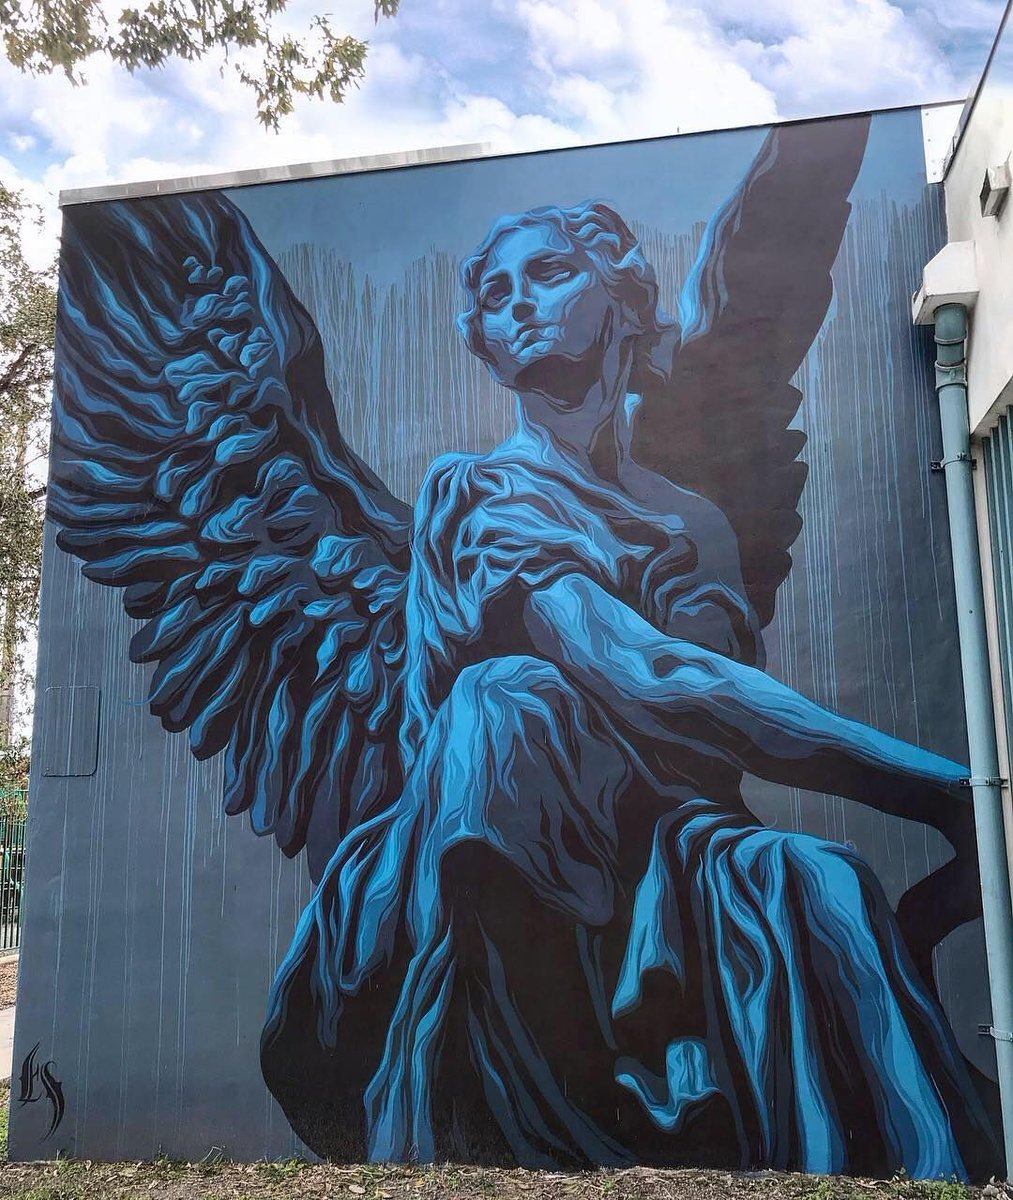 What an eye-catching streetmural by @zoueh_skotnes as part of @therawproject_ Miami 
Photo by: @kaotik954 

#beautifulbizarre #Zoueh #therawproject #ericskotnes #streetartist #streetart #streetmural #angelart #angel #largeart #giantart #outdoorart #loveart #blueart